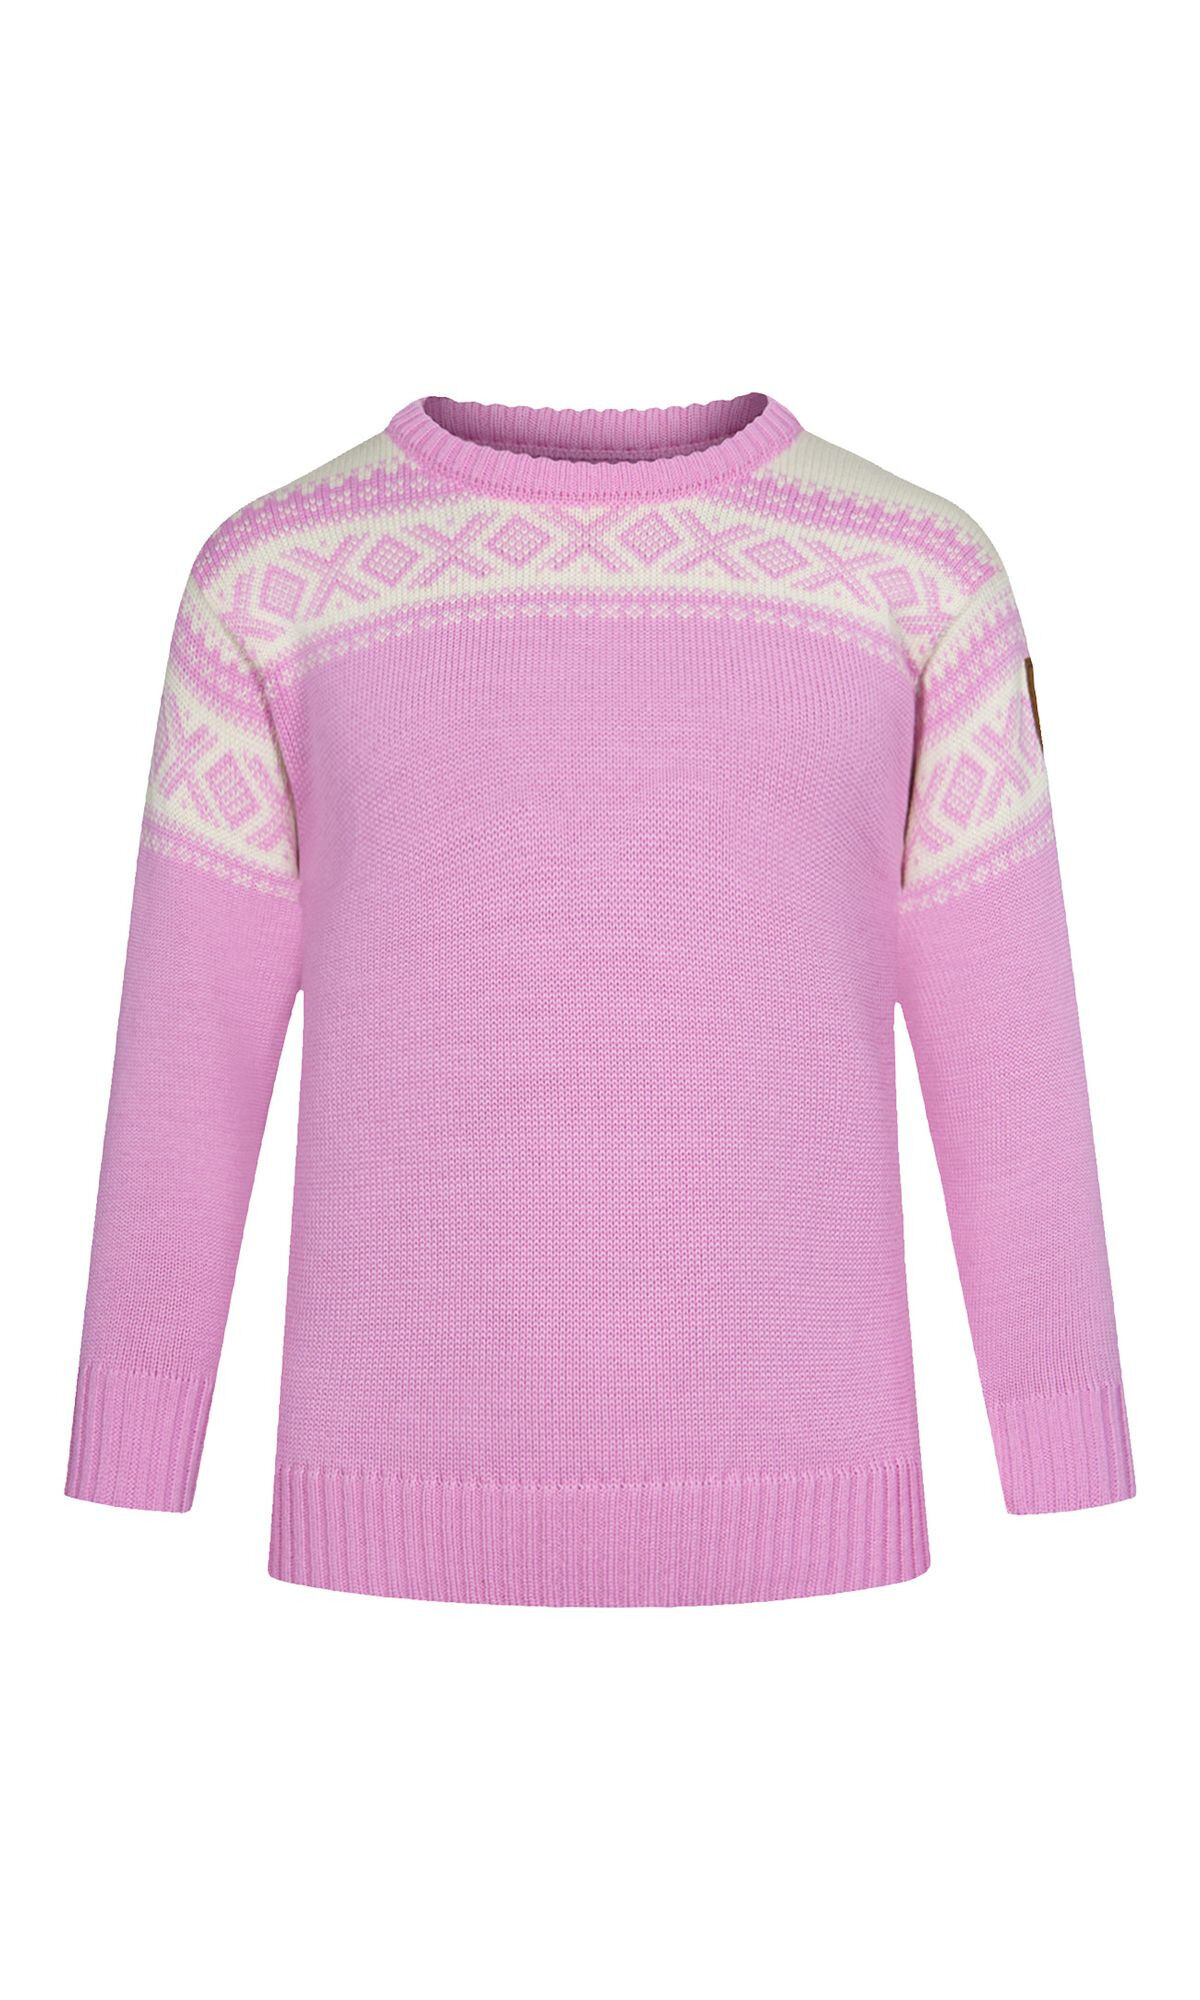 Dale of Norway Cortina Kids Sweater - Dětsky pullover | Hardloop